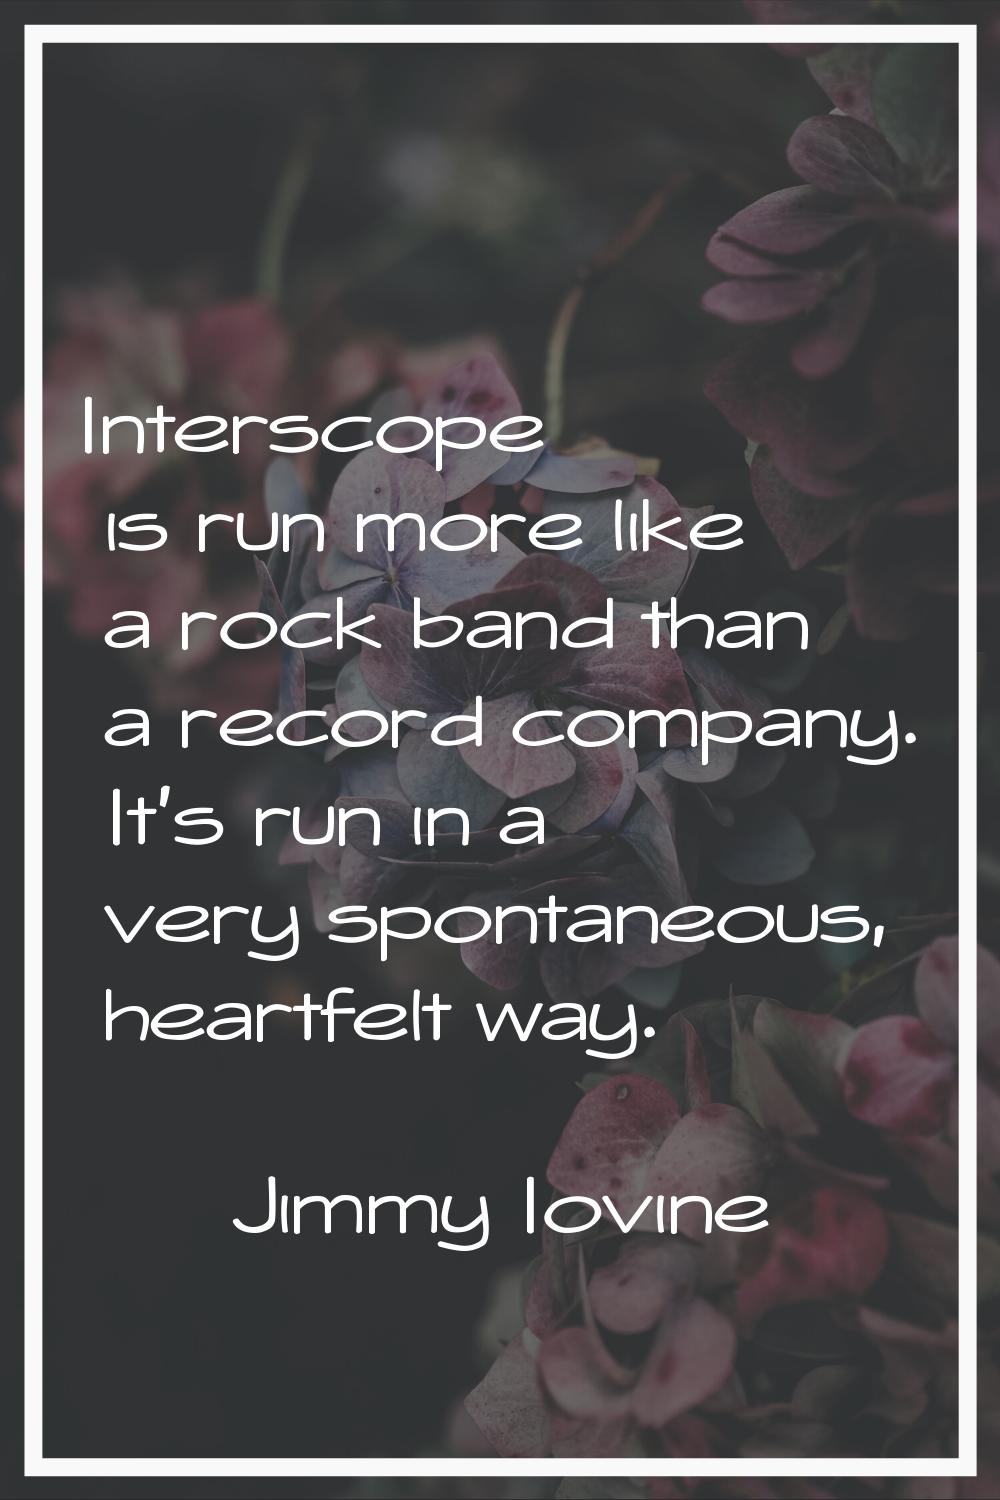 Interscope is run more like a rock band than a record company. It's run in a very spontaneous, hear